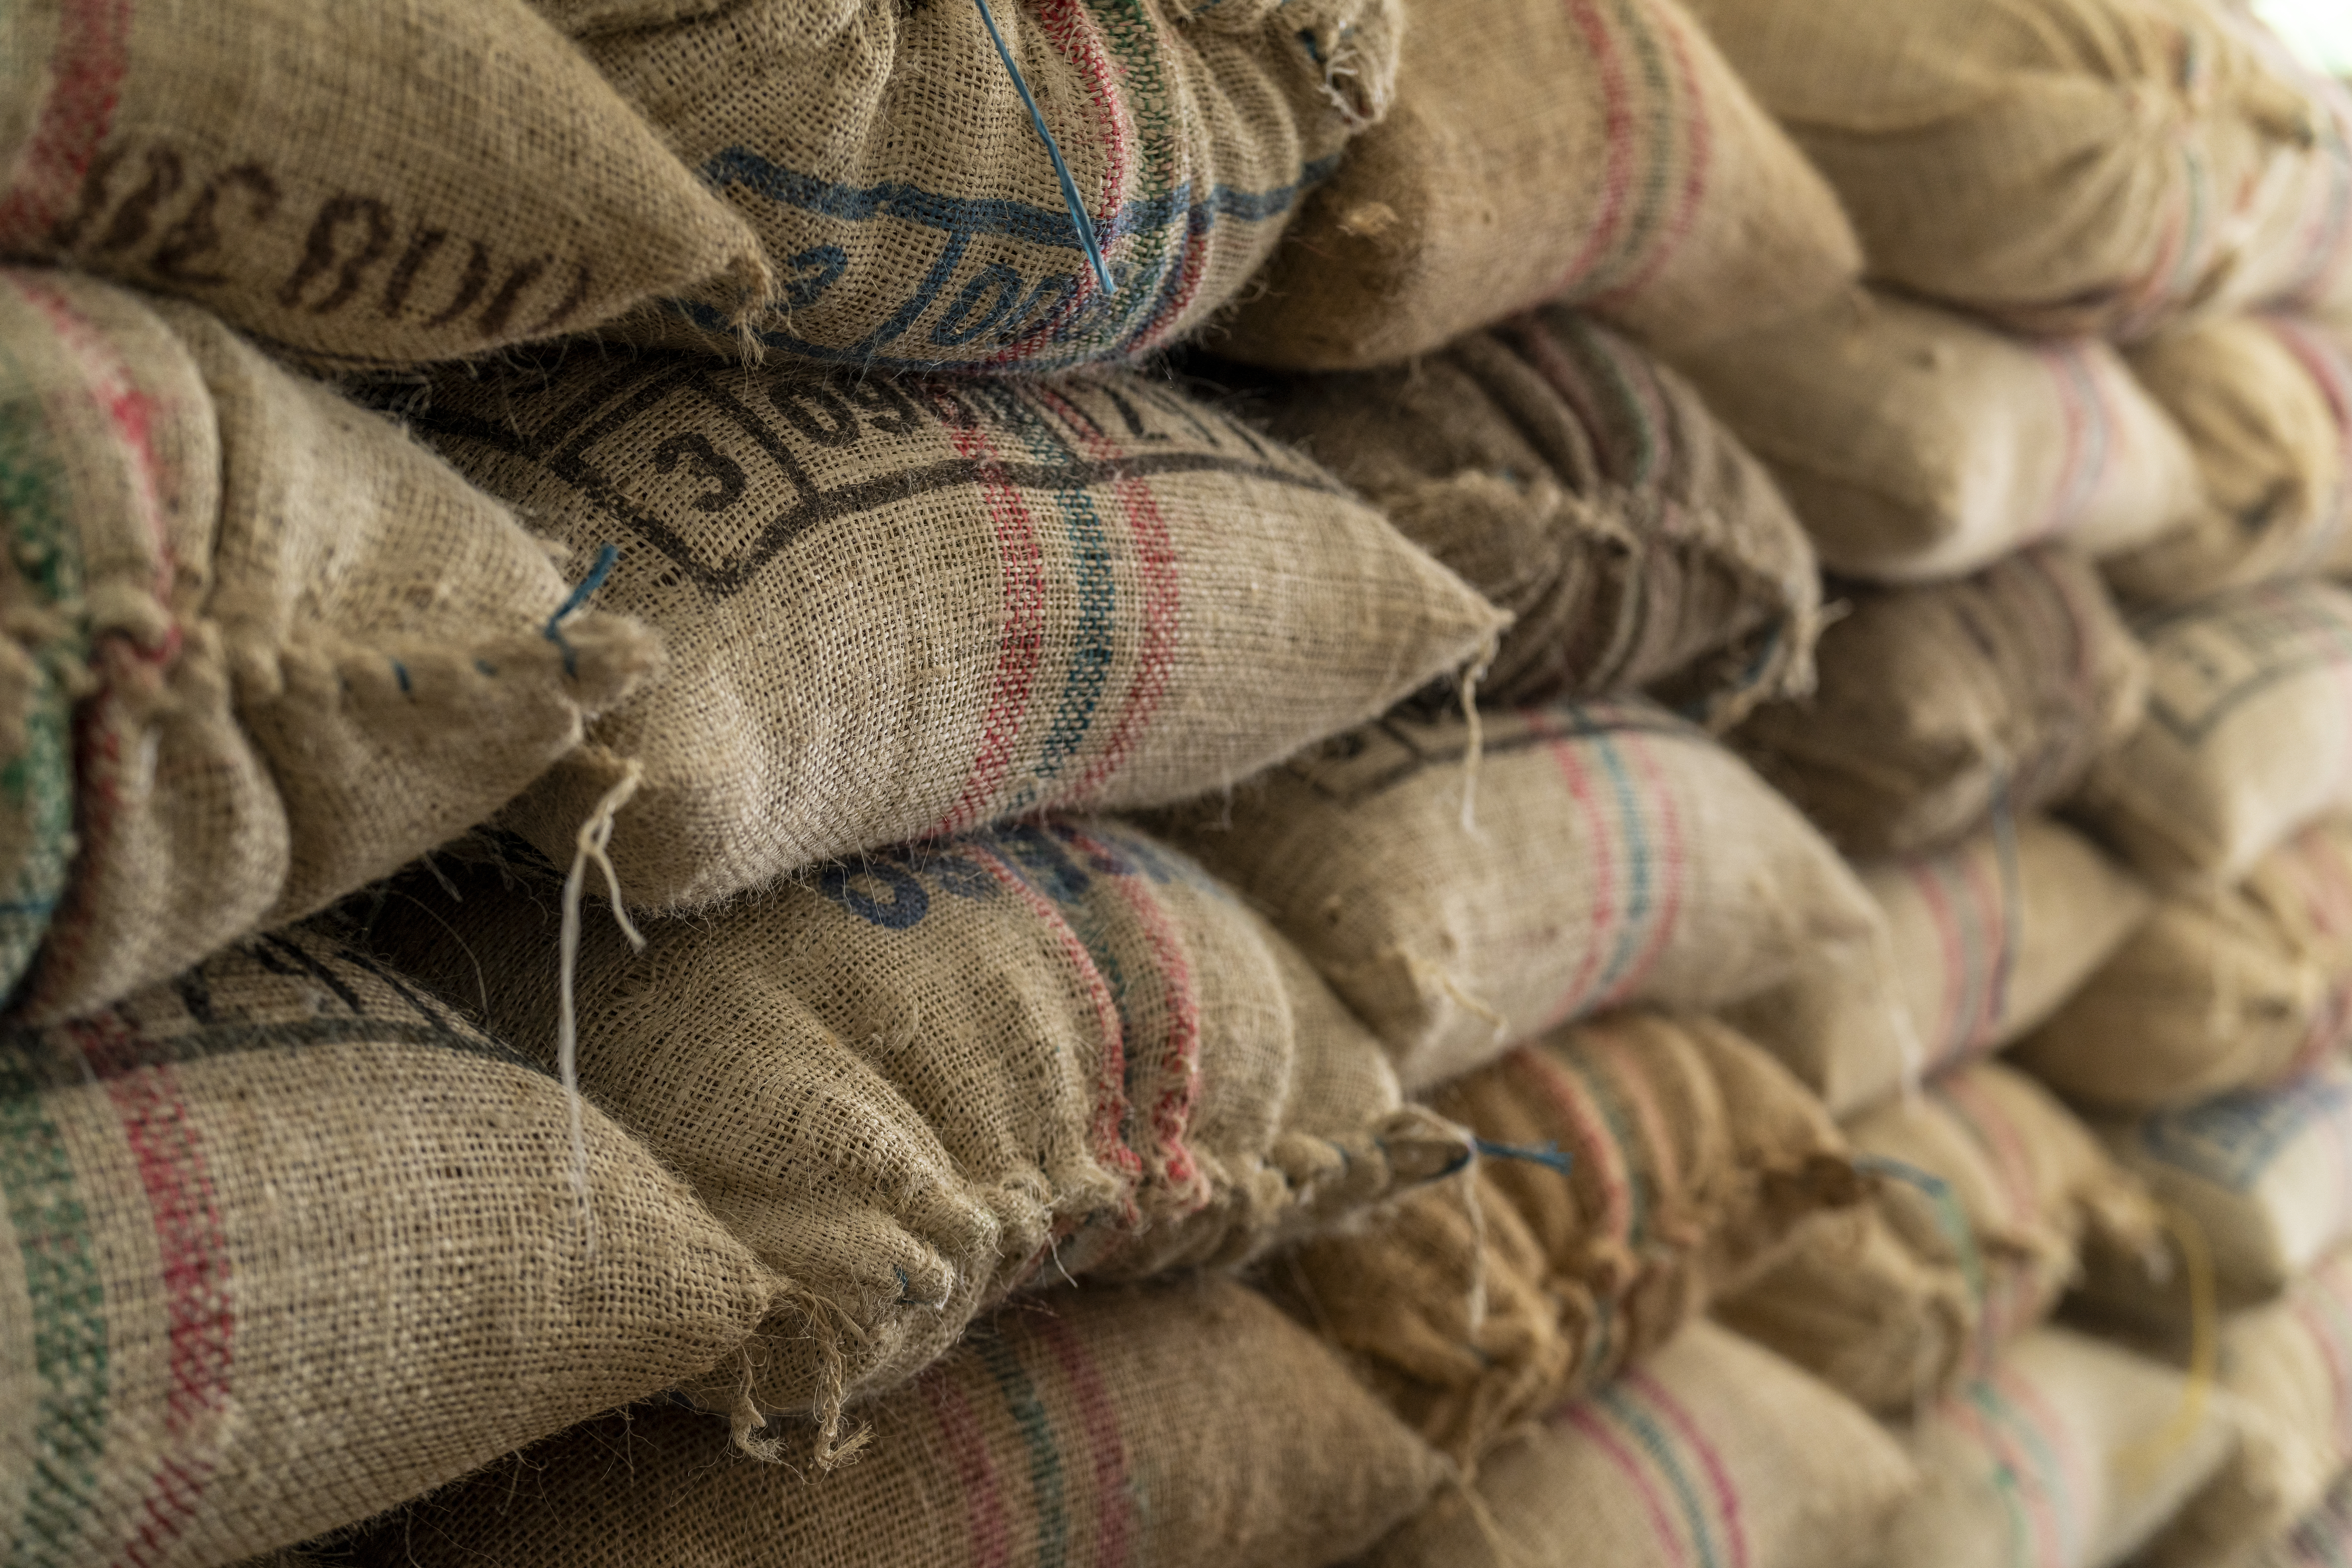 Coffee beans ready for export in Santa Marta